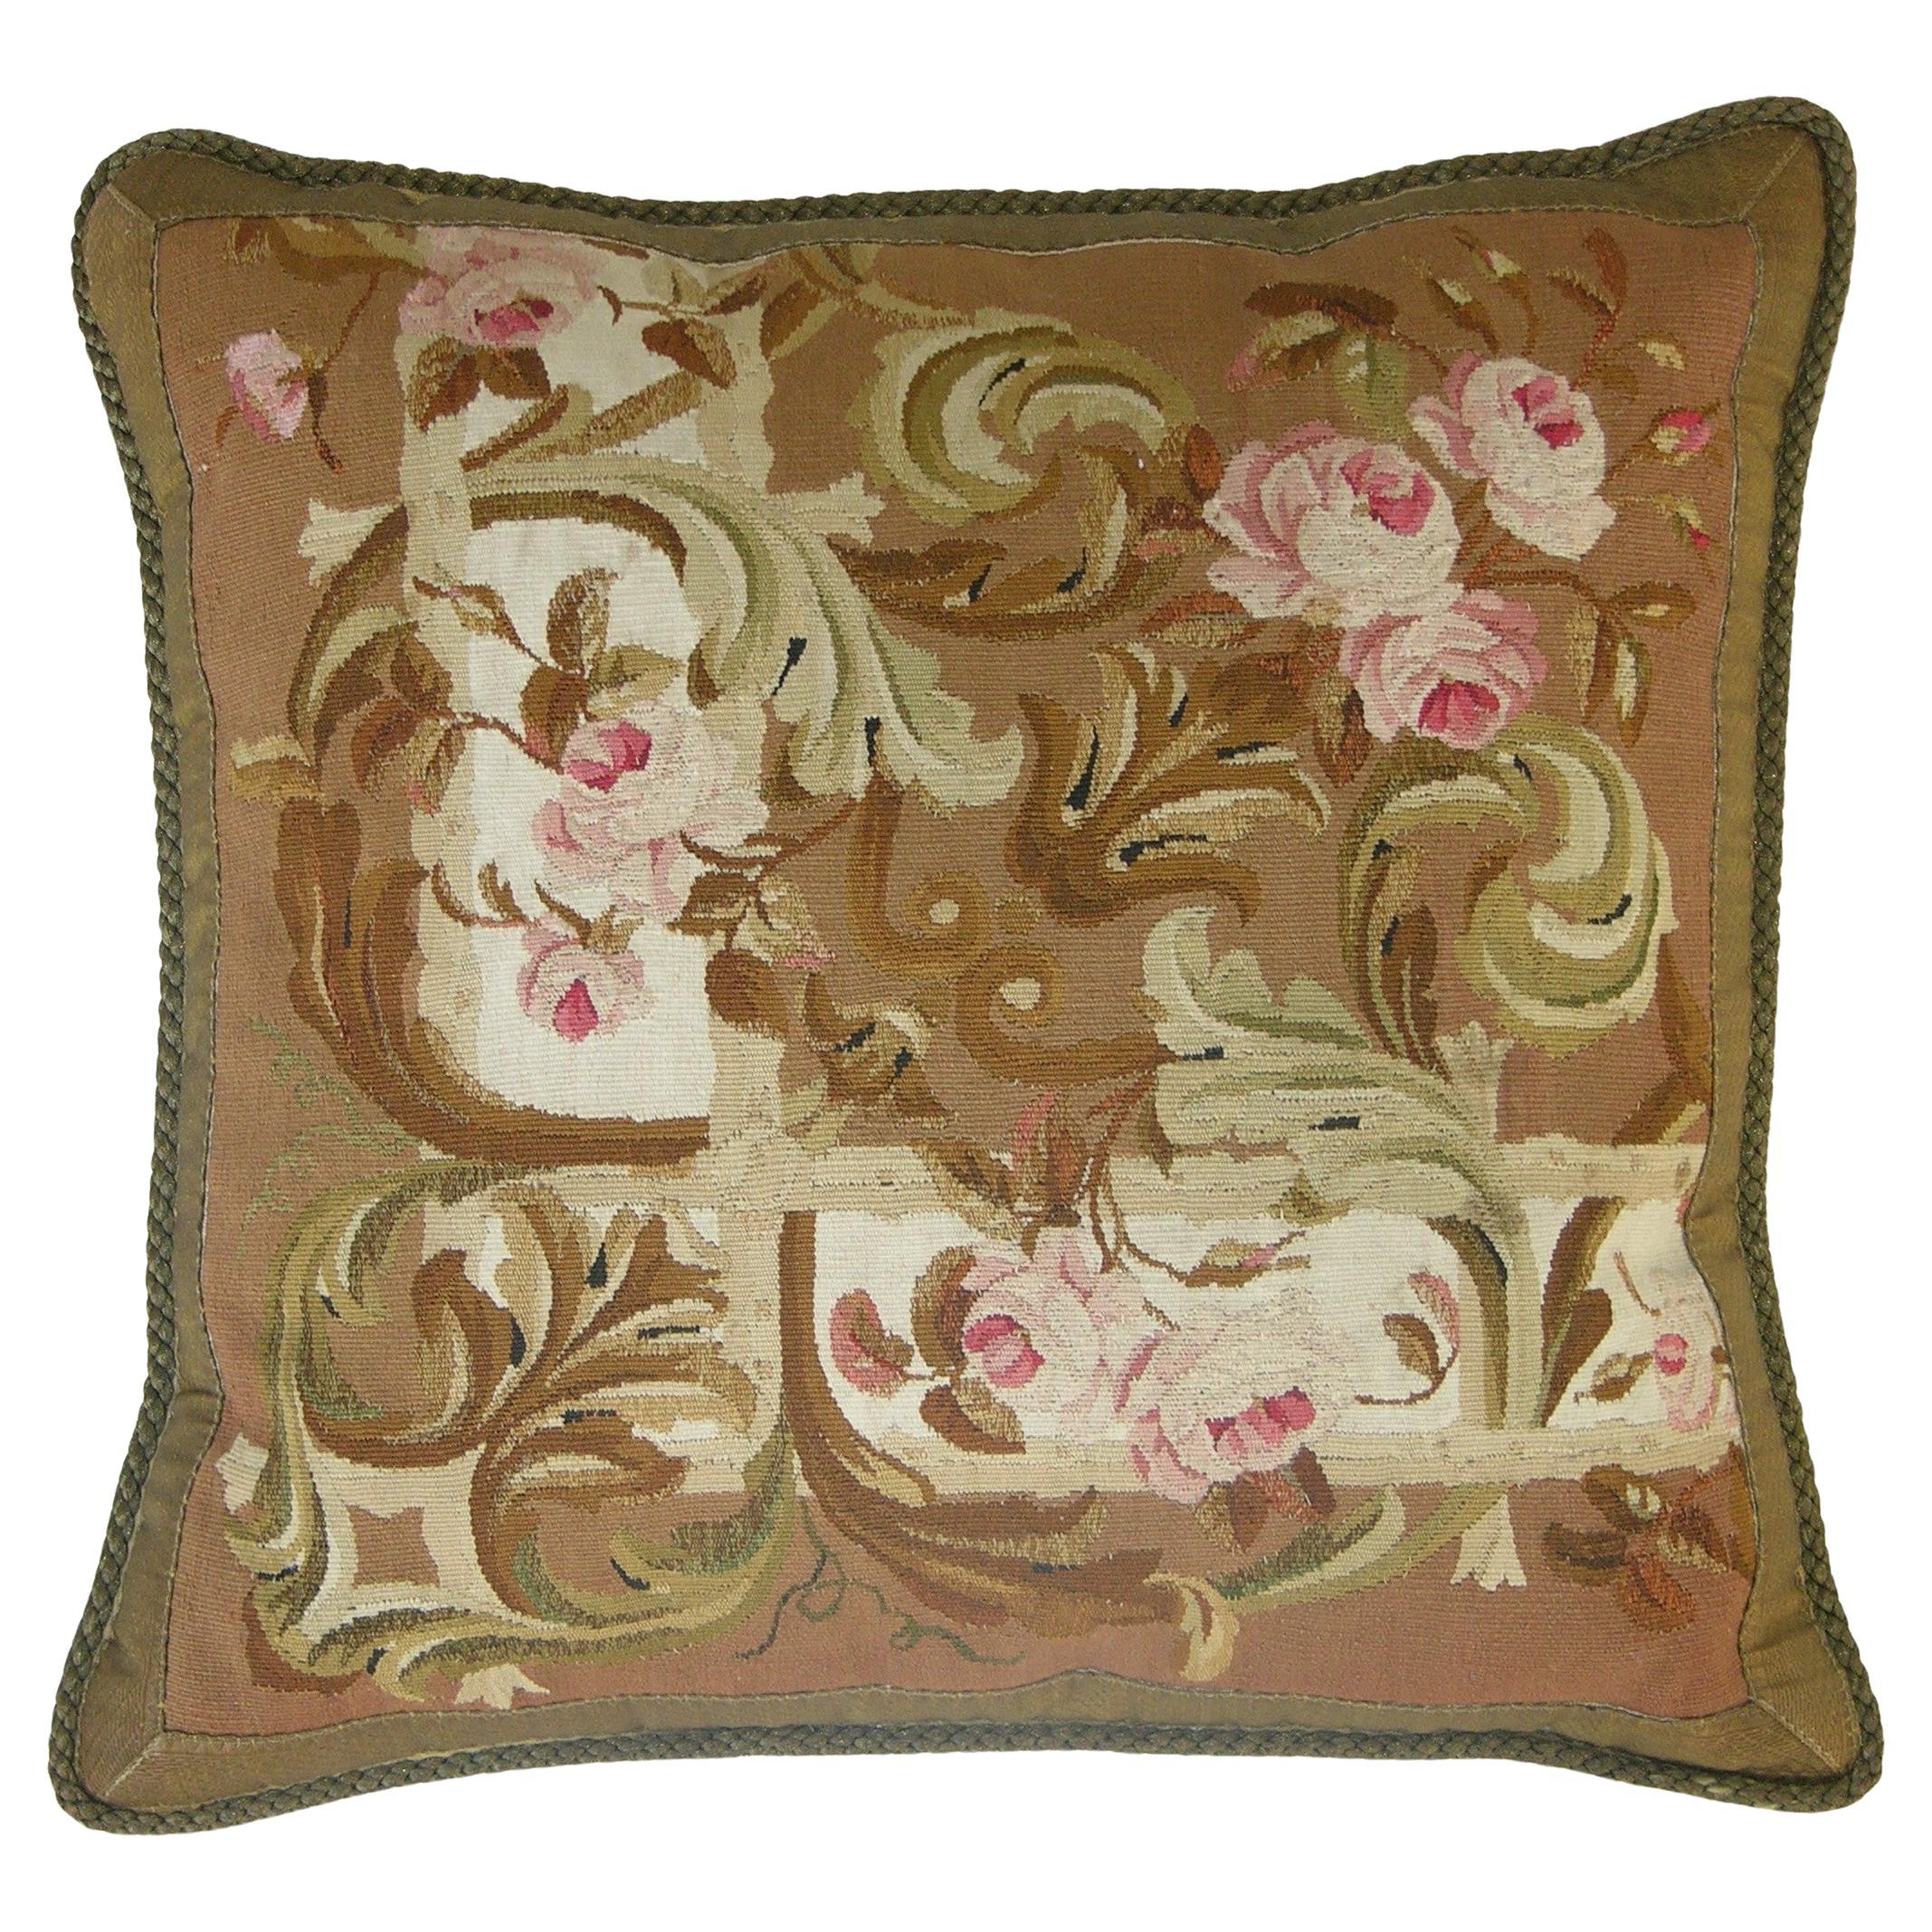 Antique 19th Century French Aubusson Tapestry Pillow - 23'' X 22''